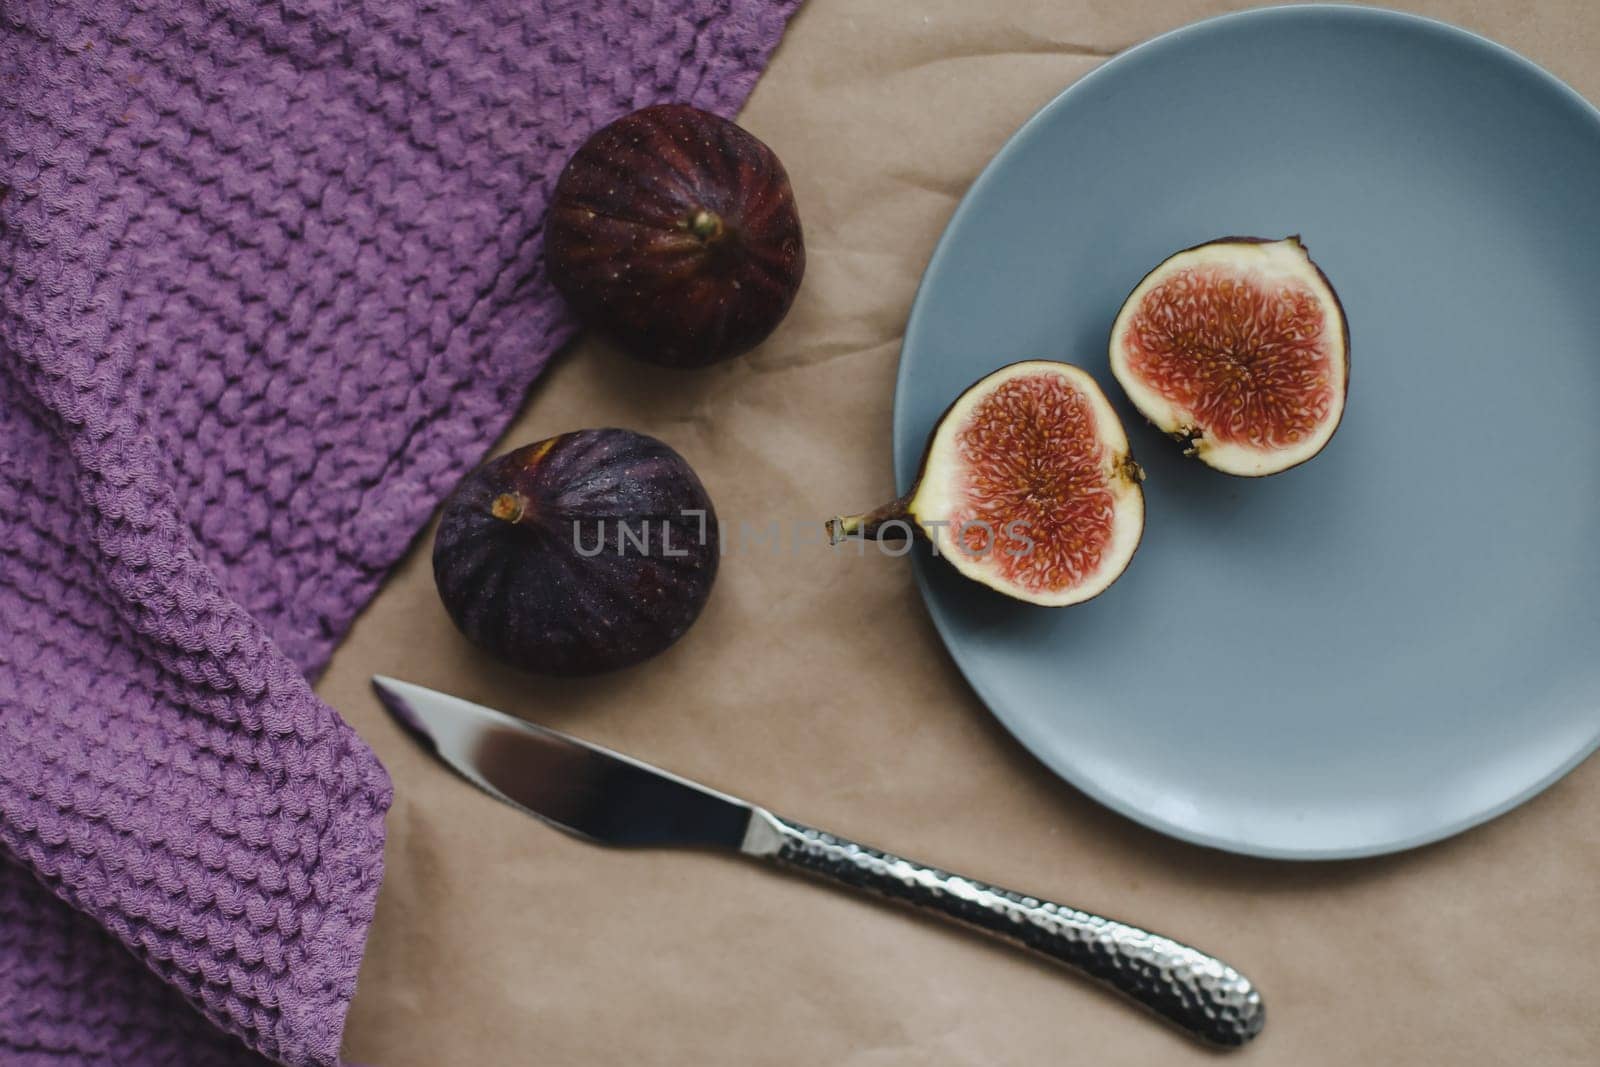 Rustic still life with fresh ripe figs. High quality photo